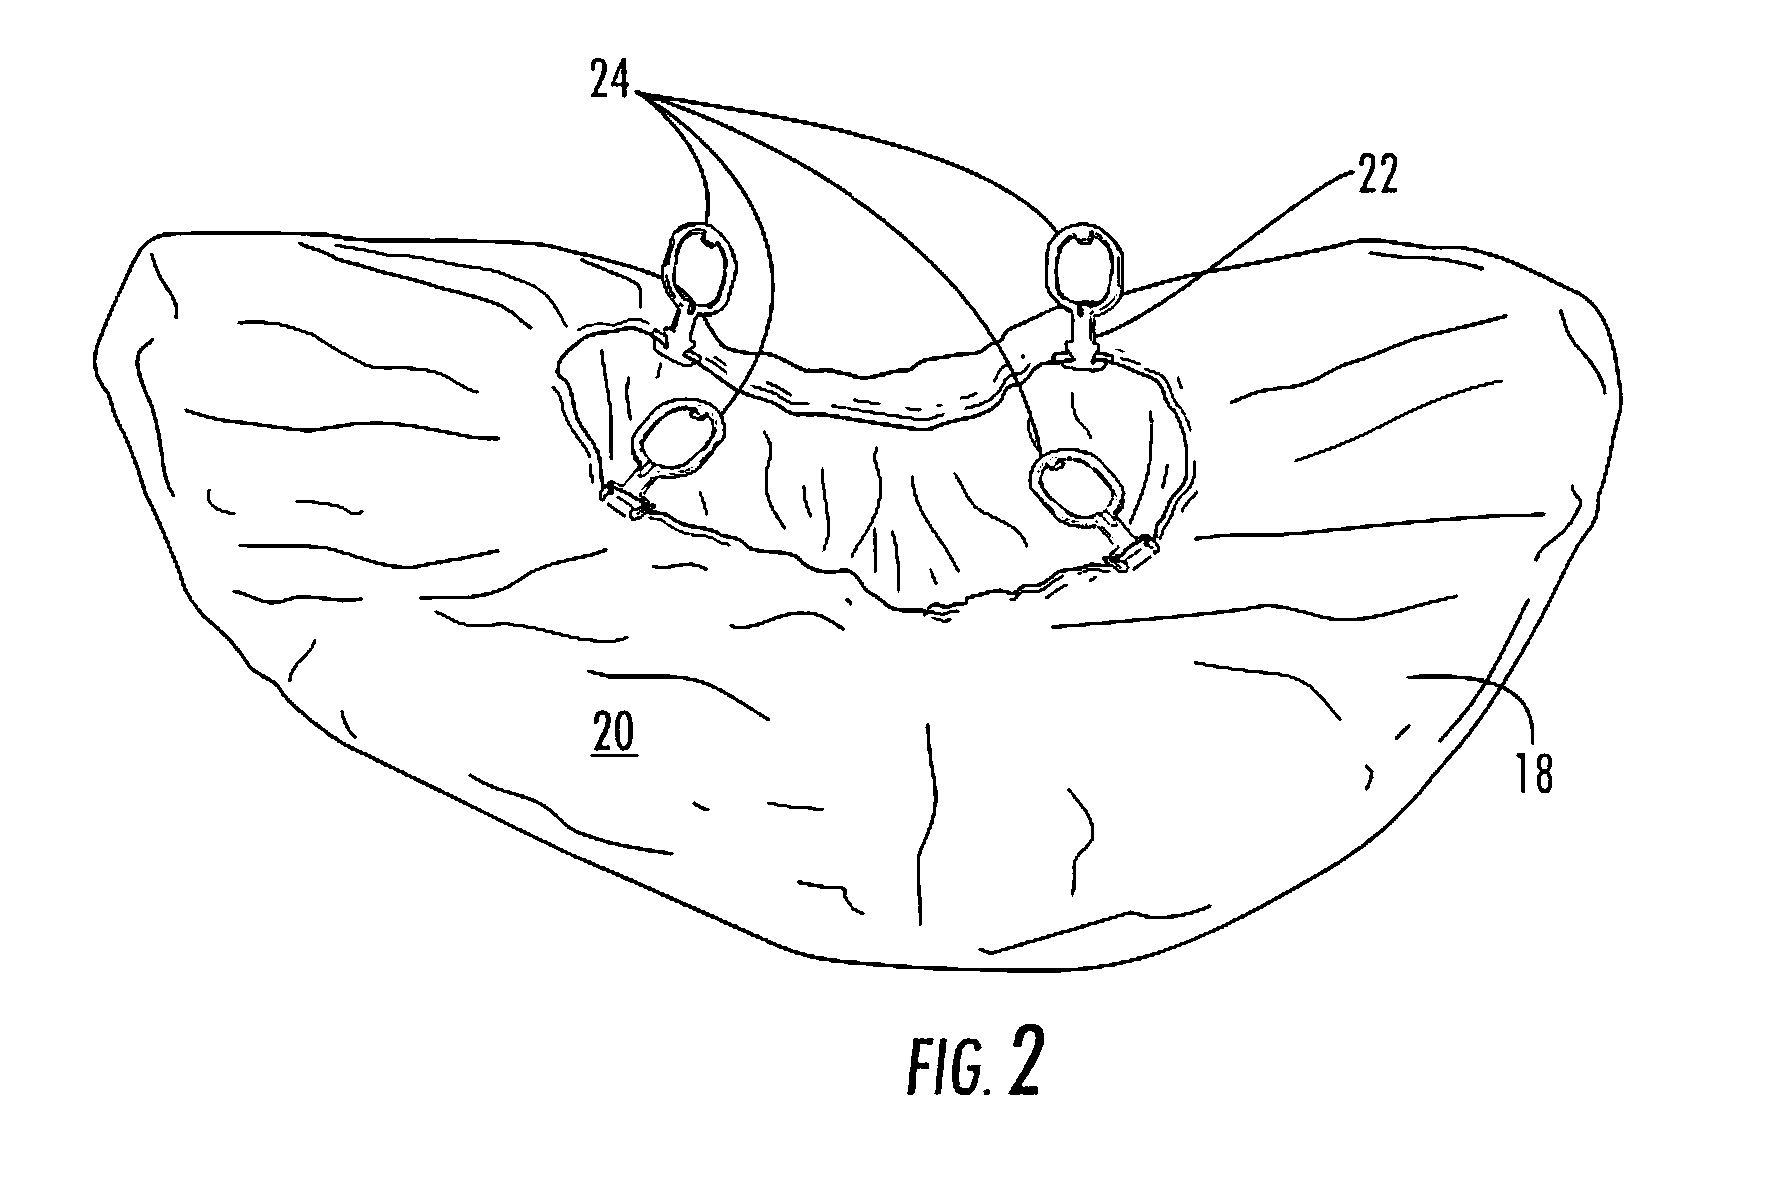 Automatic Shoe Cover Dispensing Device